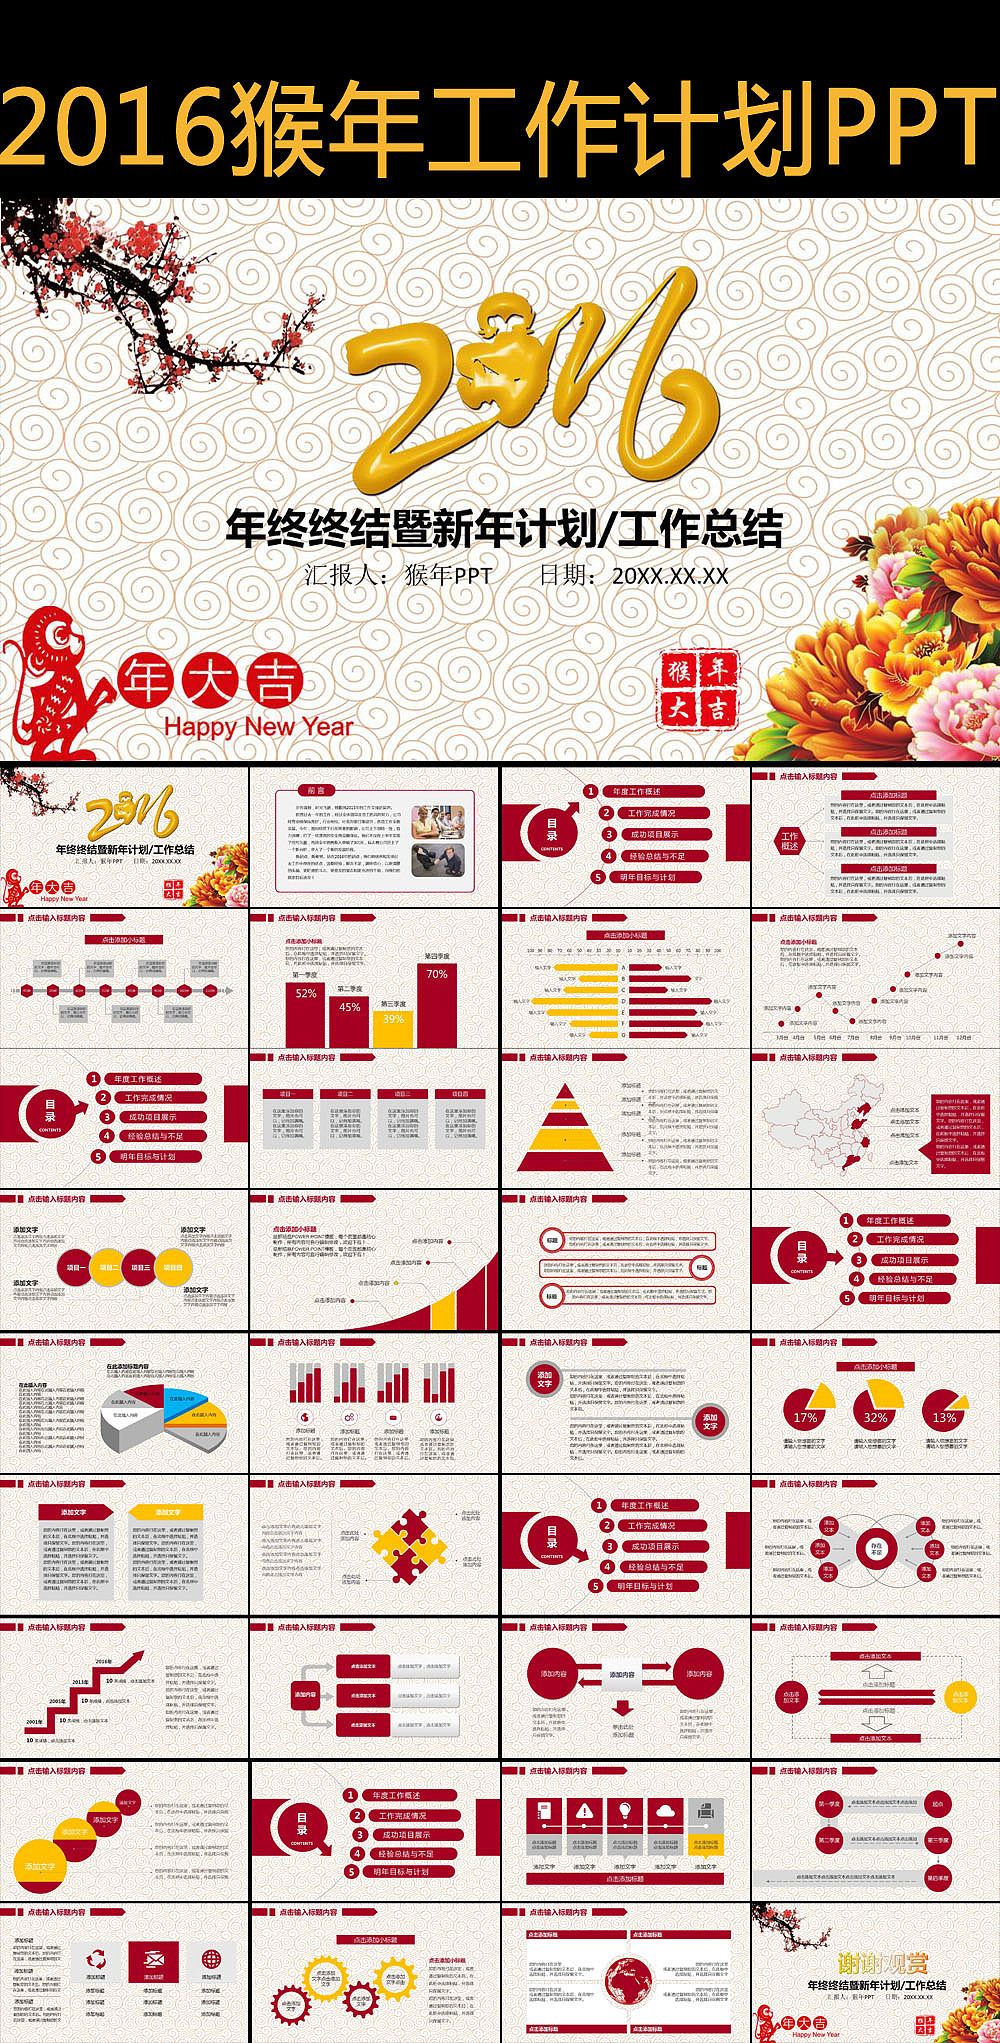 Year of the Monkey Pledge Conference 2016 New Year Work Plan PPT Template